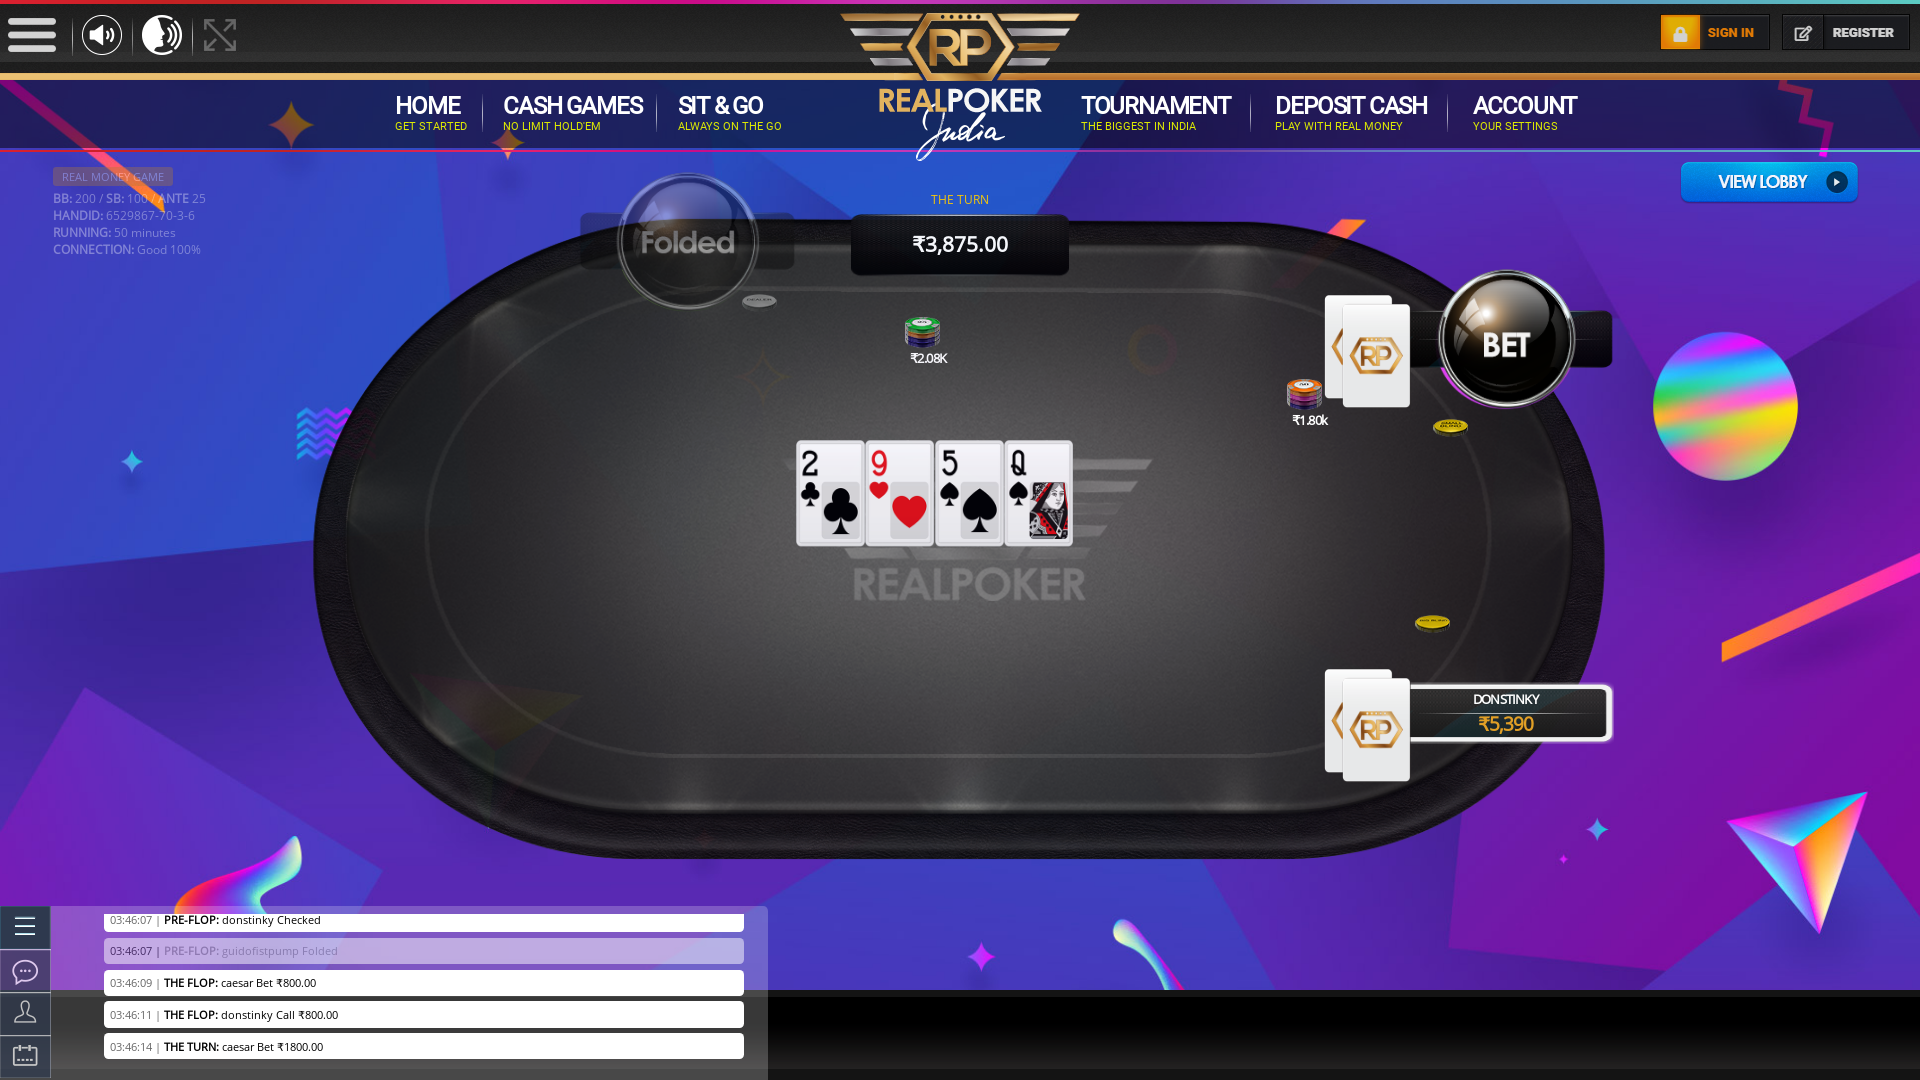 Real indian poker on a 10 player table in the 50th minute of the game